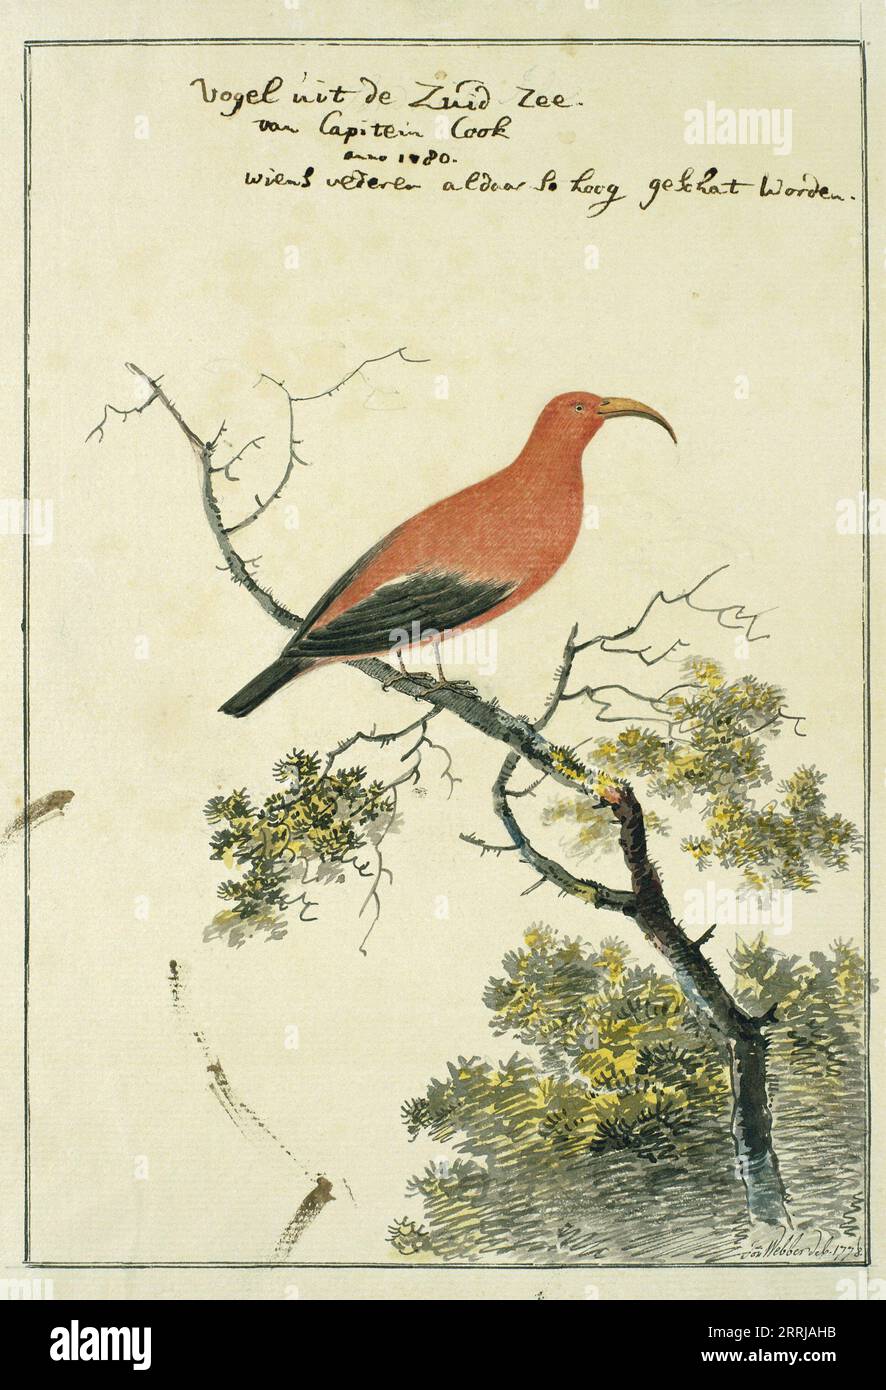 Vestiaria coccinea ('I'iwi or Scarlet Hawaiian honeycreeper), 1778. 'Bird from the South Sea of Captain Cook, 1780, whose feathers are so highly valued there'. Stock Photo